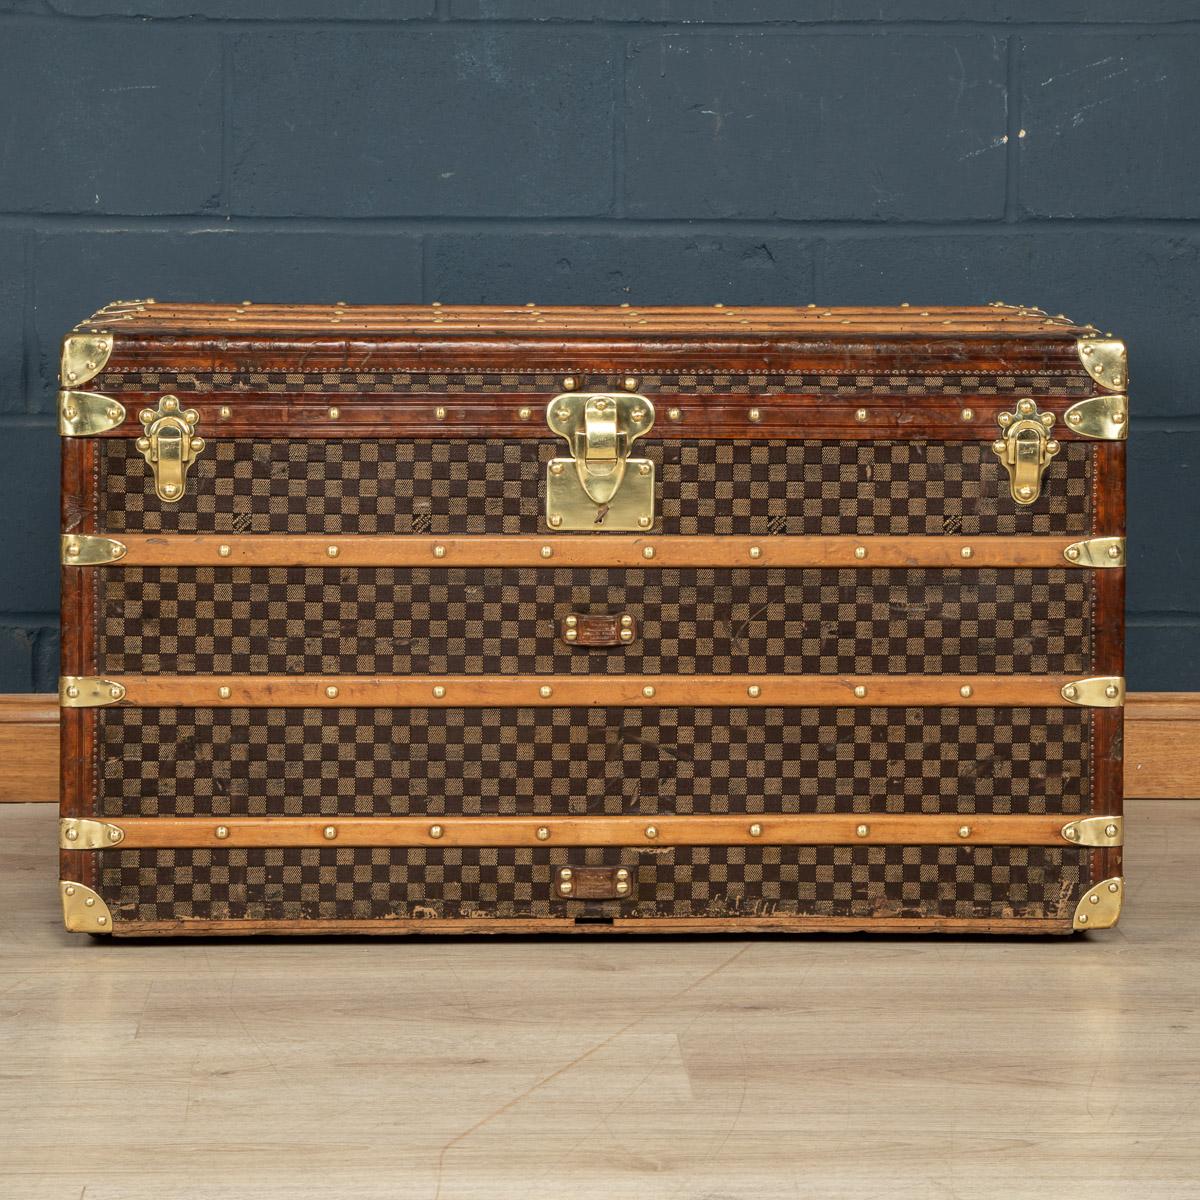 One of the rarest Louis Vuitton trunks to be offered, this trunk is covered in the world famous damier (checkerboard) canvas. Dating to around 1900, it is a perfect example of such trunks. With its leather trim, brass studs, fittings and locks it